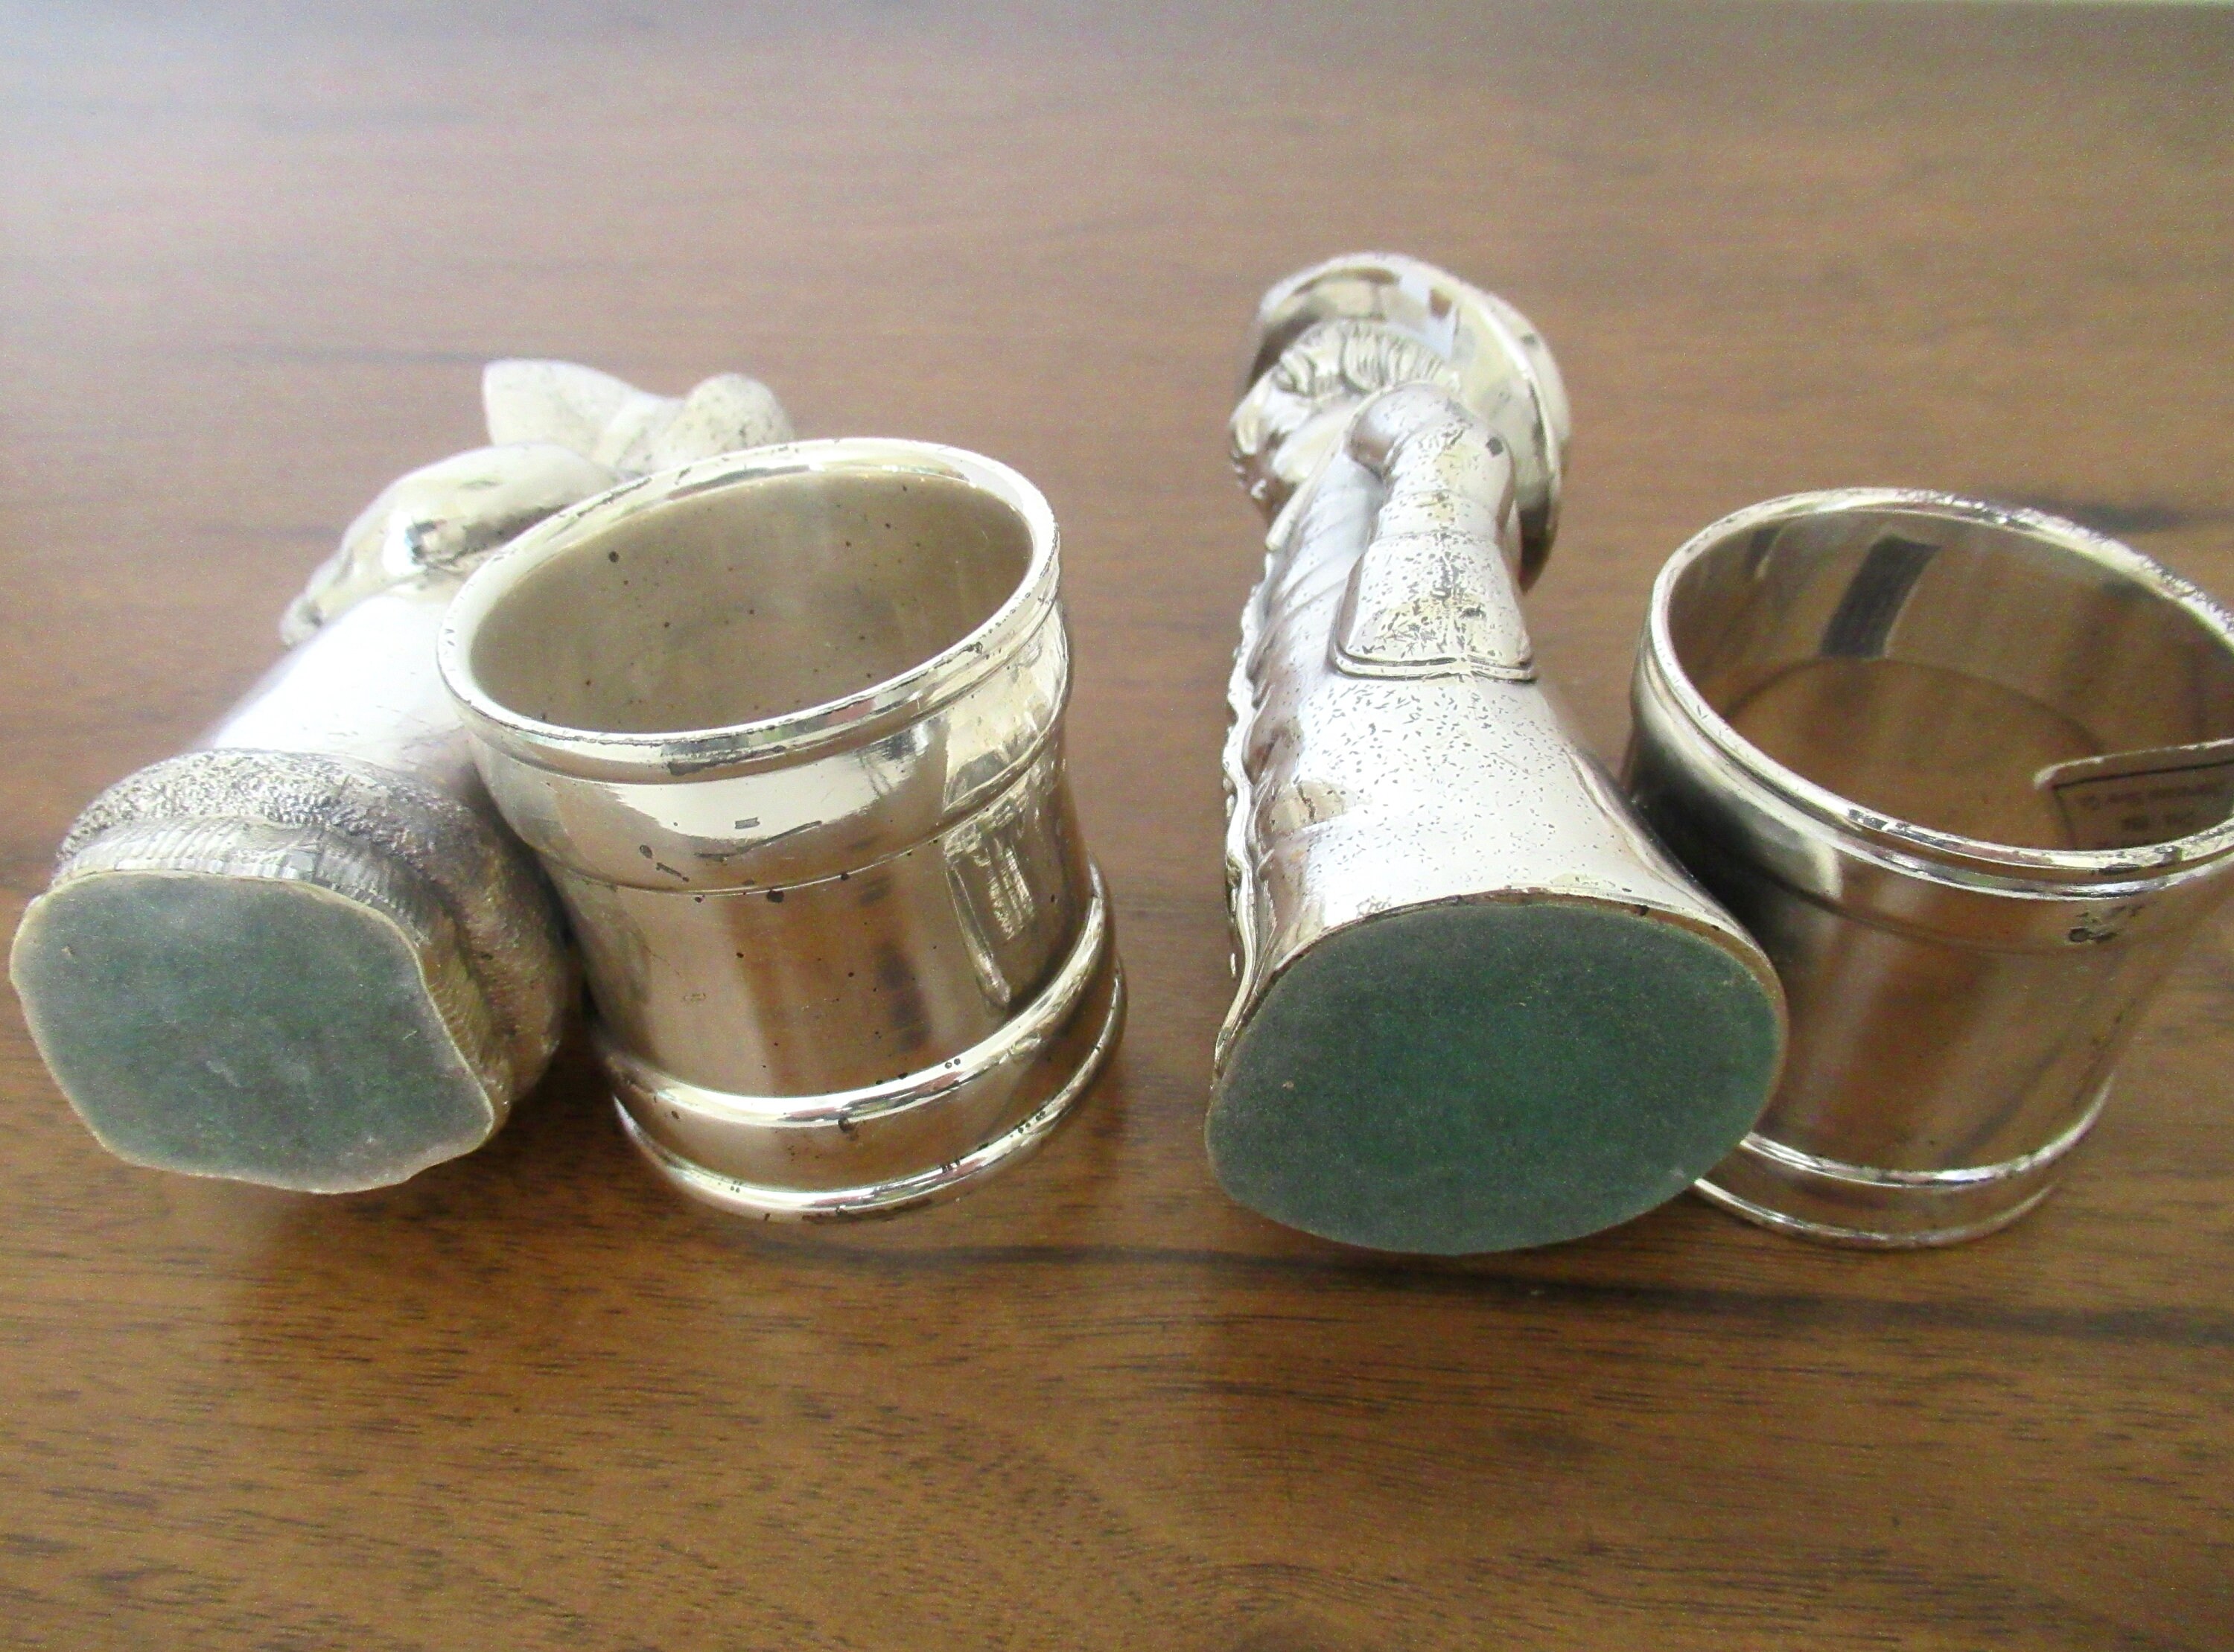 Vintage Figural Boy and Girl Napkin Rings Silverplate Kate Greenaway Meriden Britannia Victorian Reproduction by International Silver